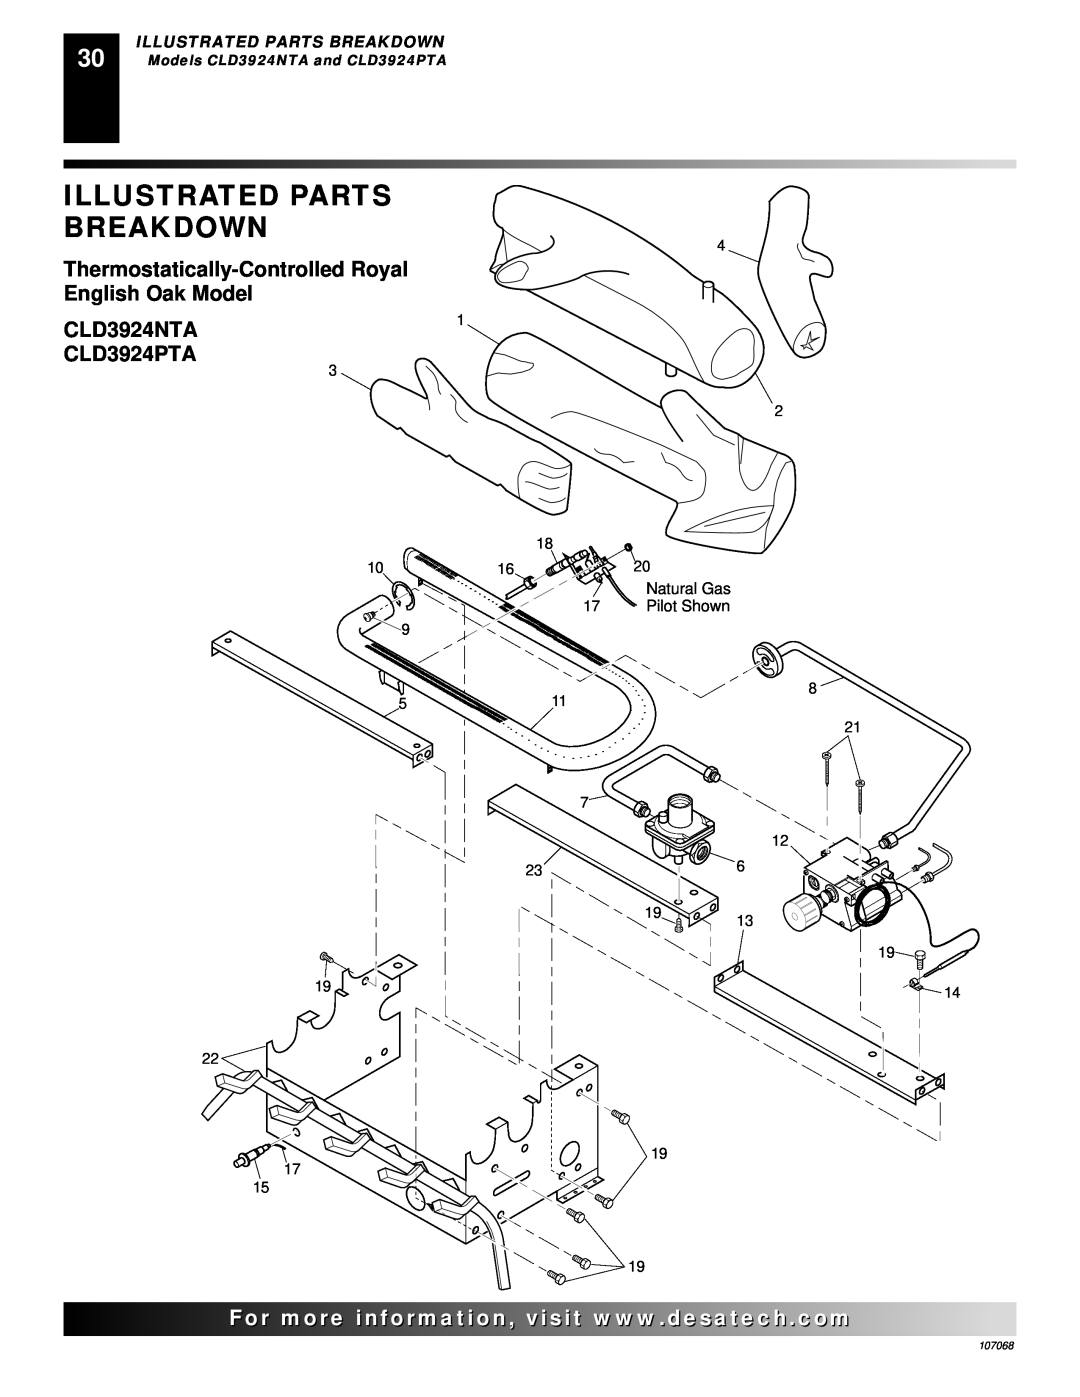 Desa CLD3018NA 24 CLD3924NTA CLD3924PTA, Illustrated Parts Breakdown, Models CLD3924NTA and CLD3924PTA 